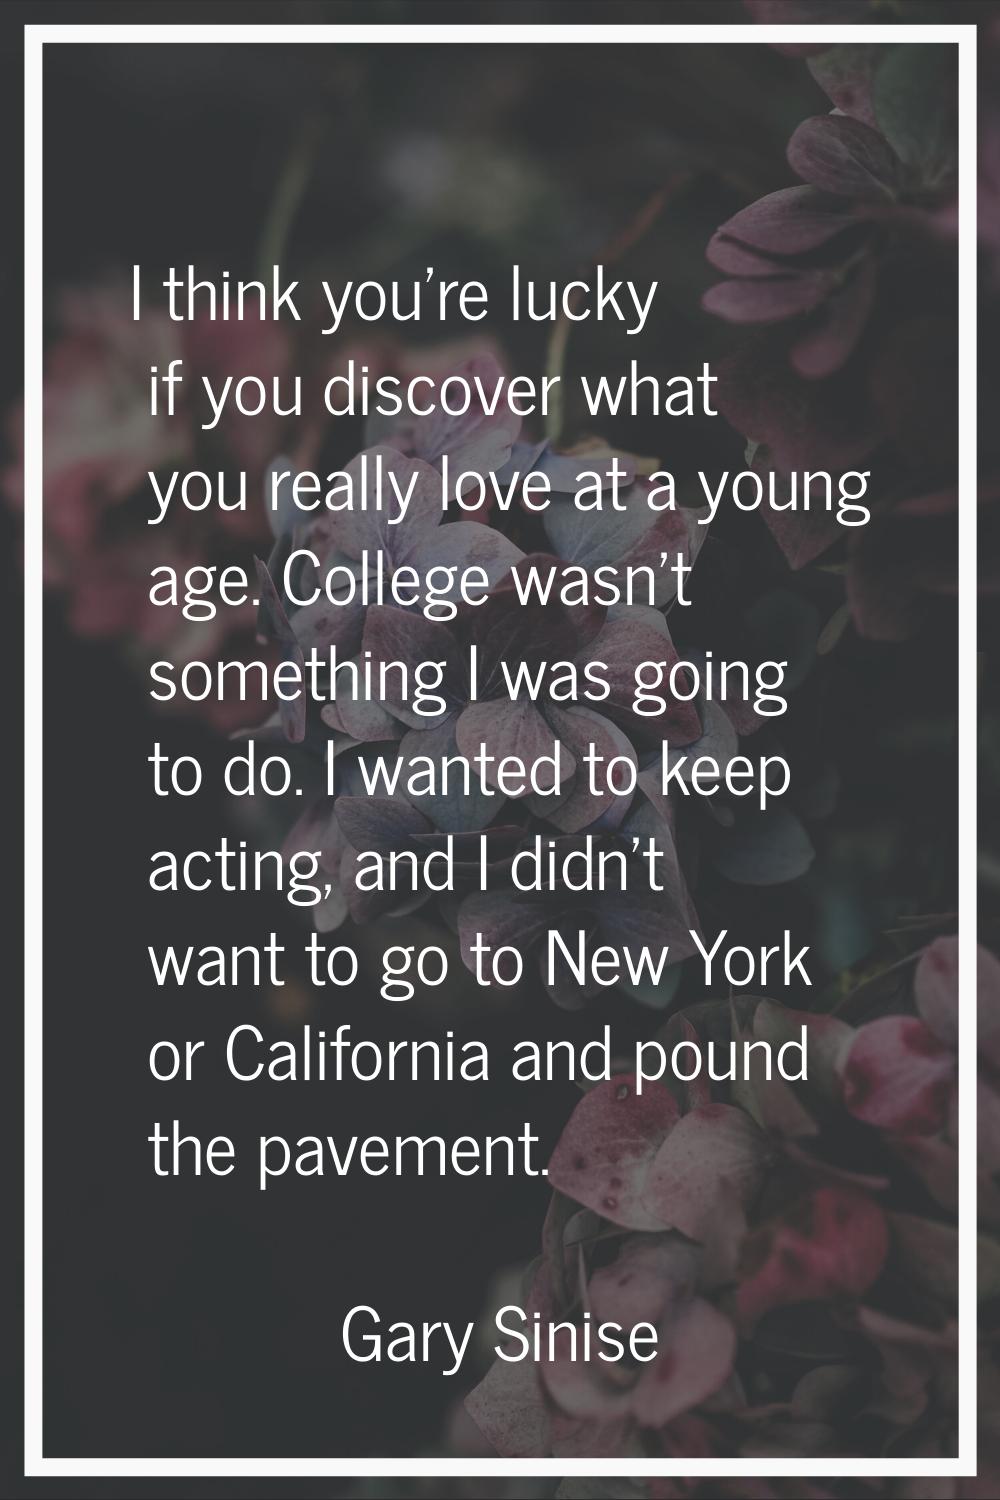 I think you're lucky if you discover what you really love at a young age. College wasn't something 